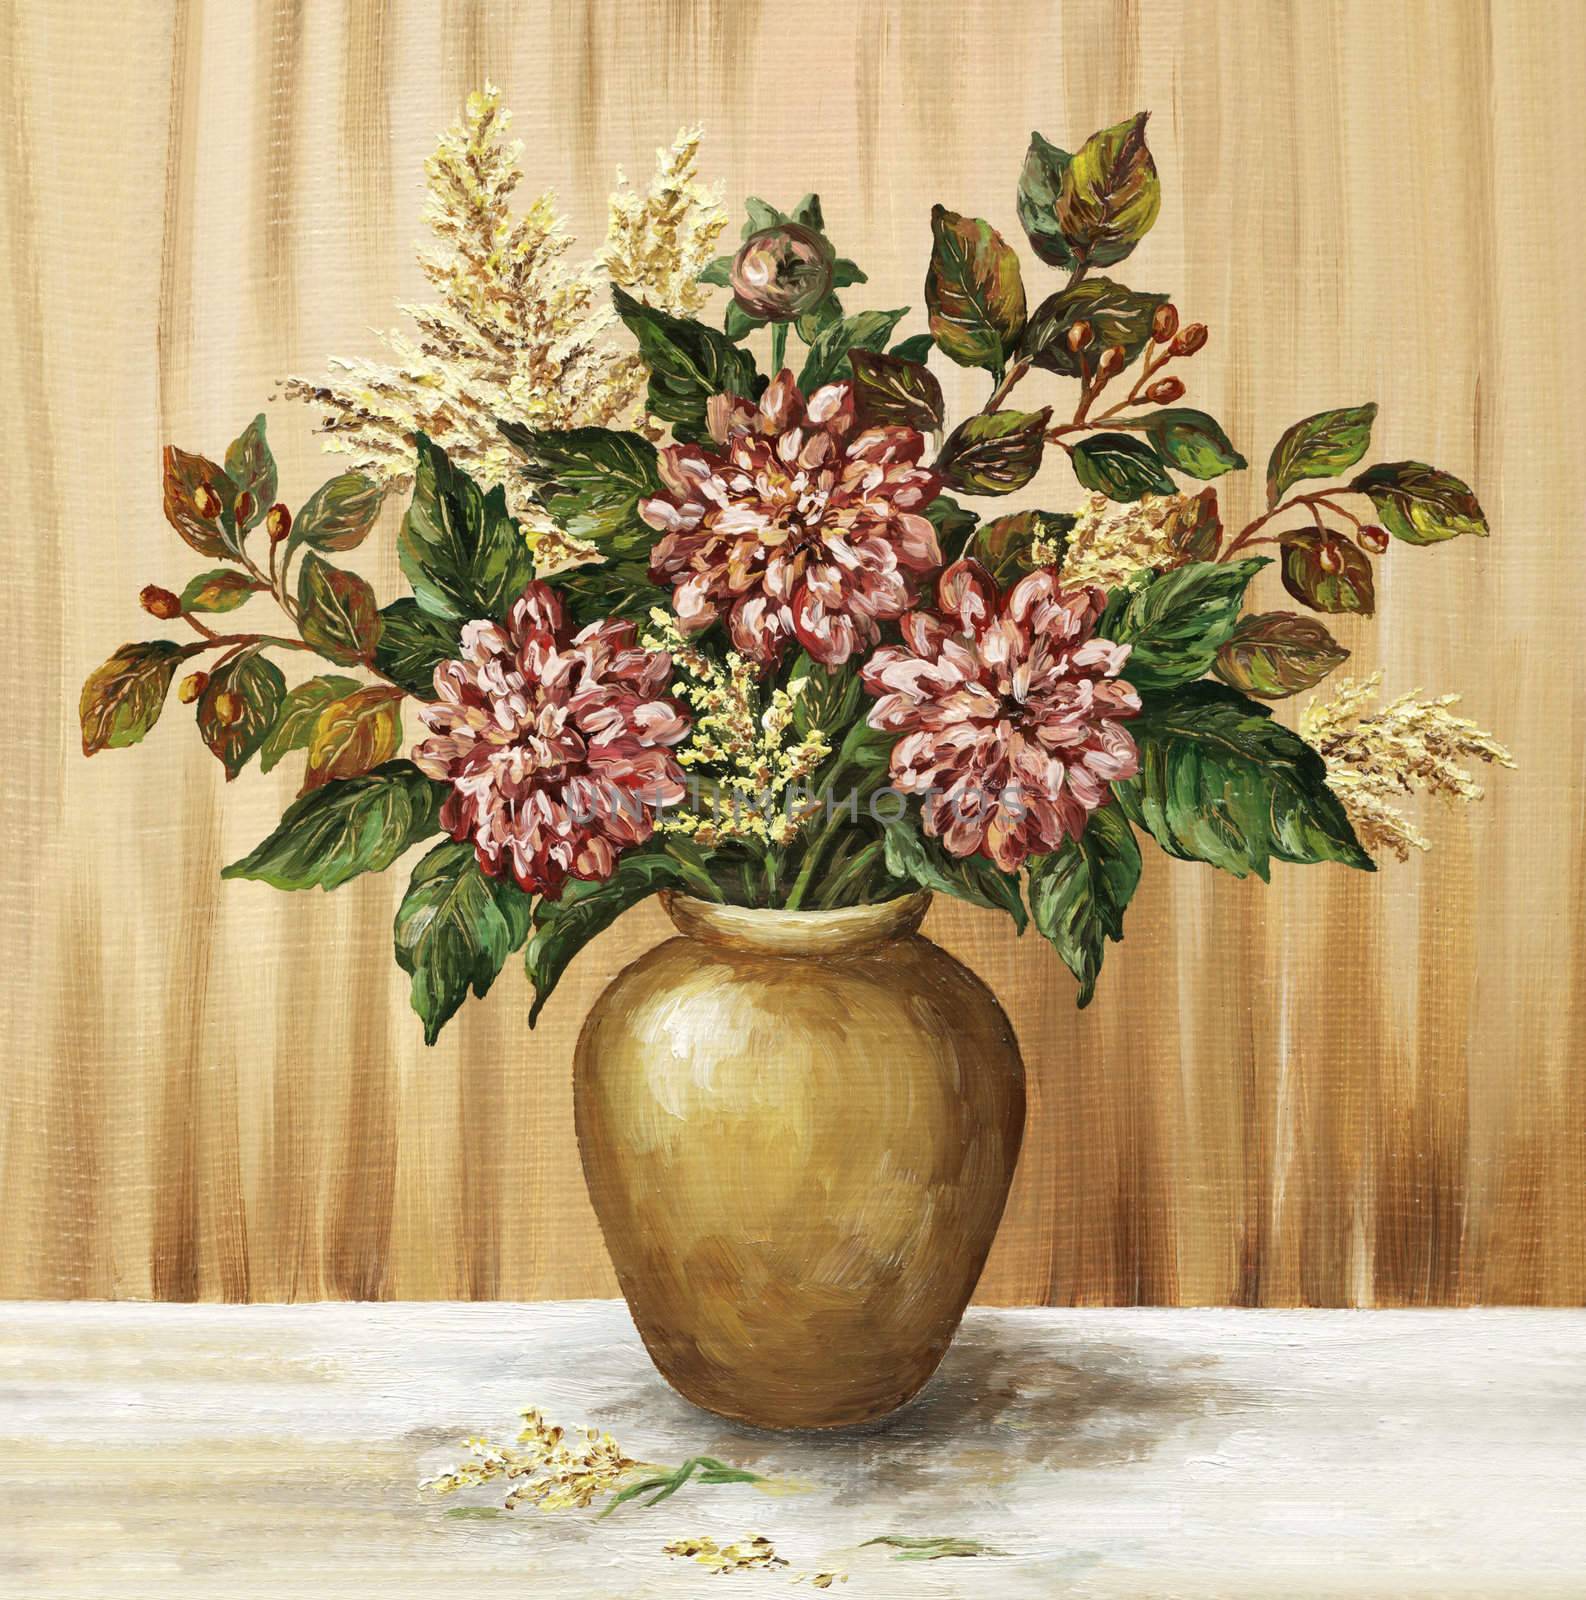 Picture oil paints on a canvas: a bouquet of dahlias in a clay pot